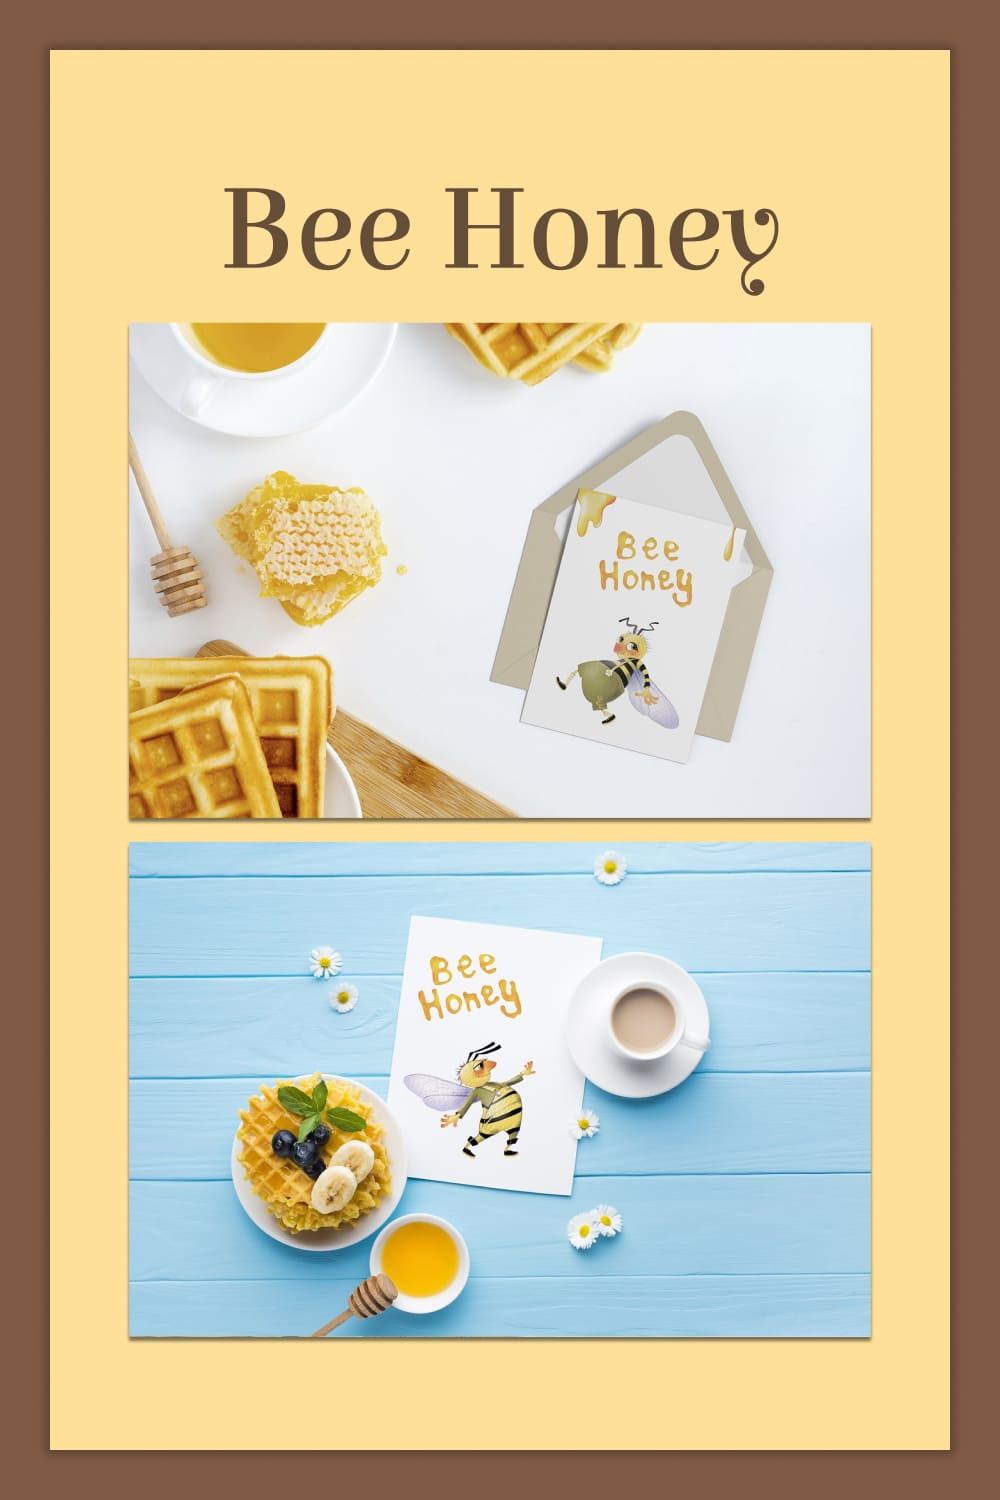 Bee honey - pinterest image preview.